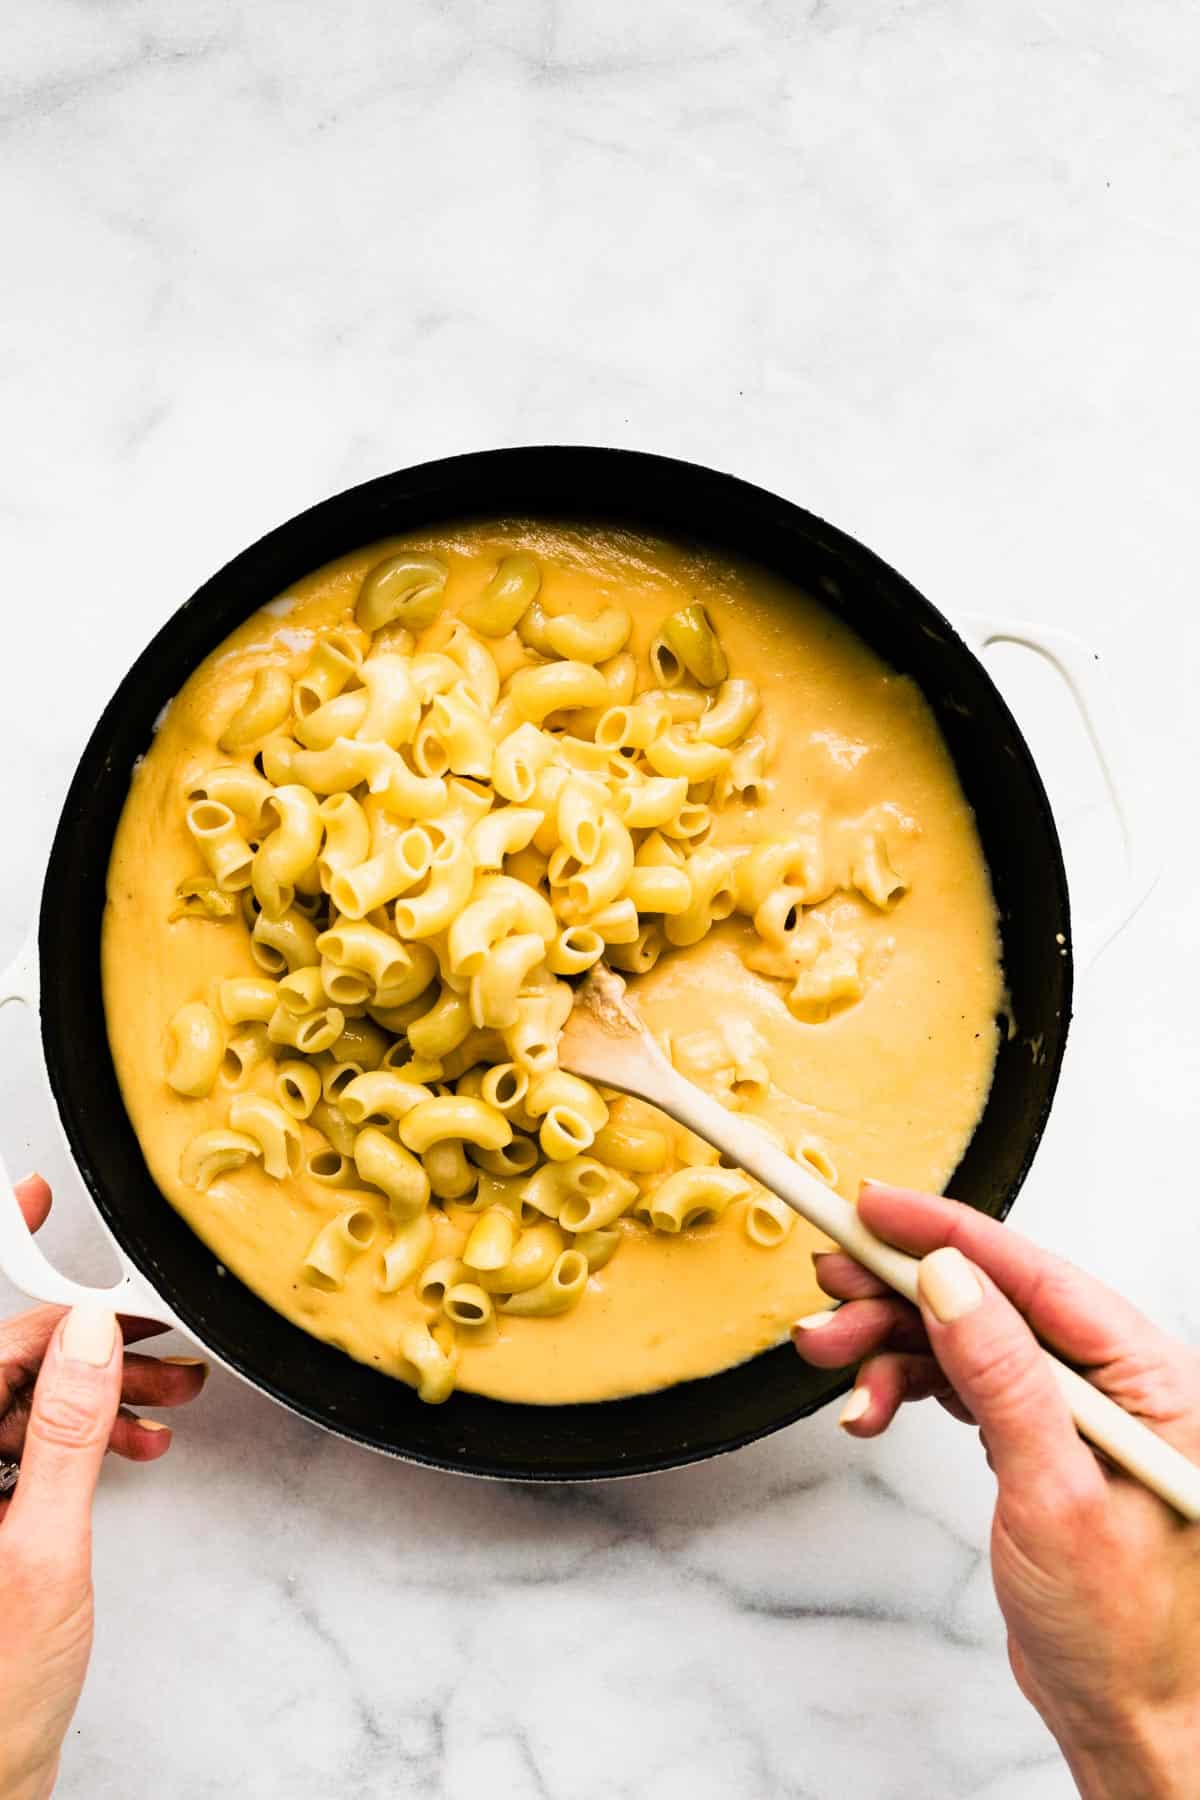 A woman's hand holding a wooden spoon stirring gluten free noodles into a cheese sauce.